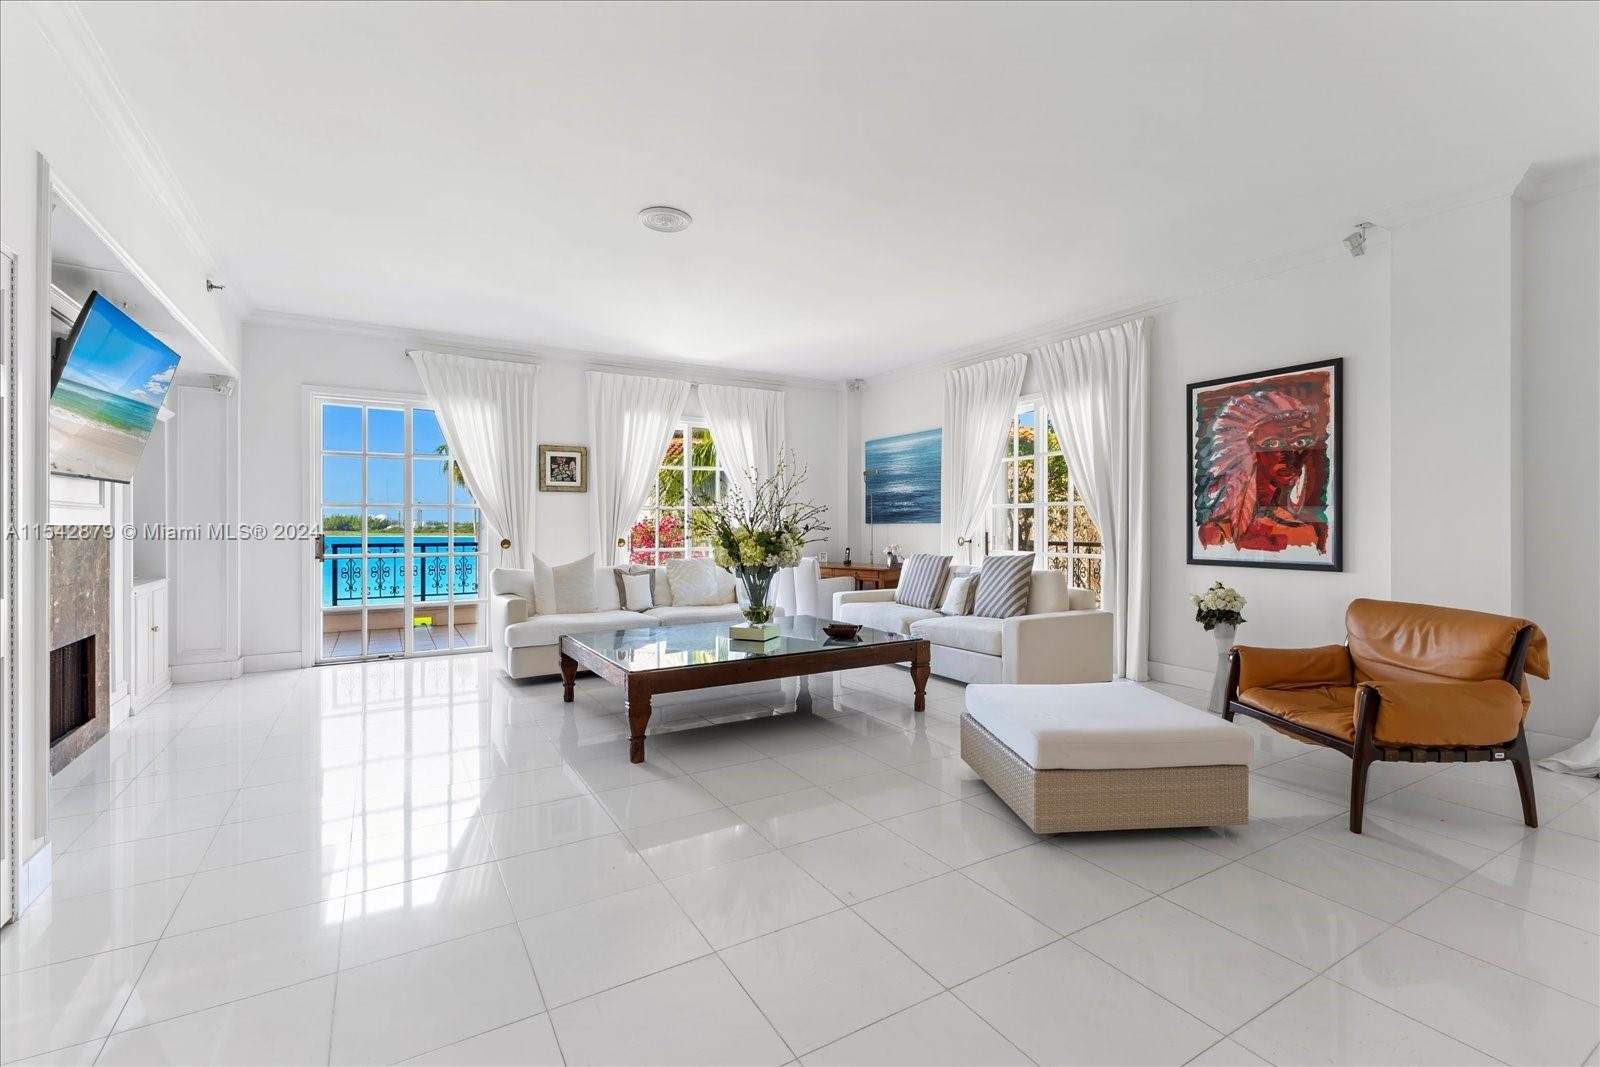 2. Fisher Island Dr